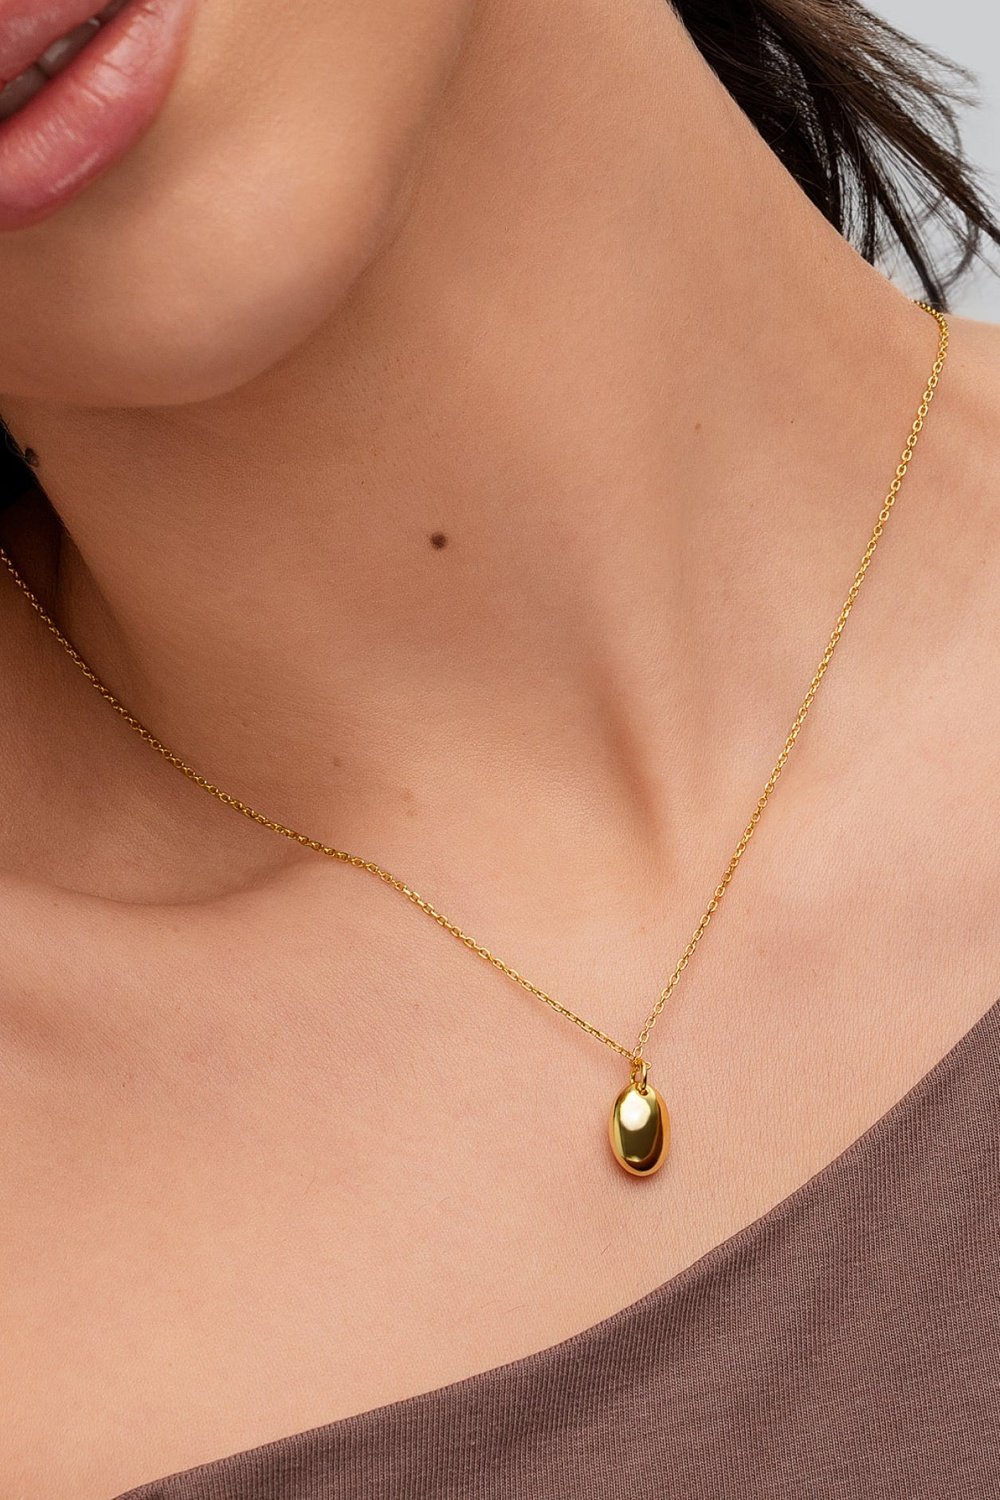 Ideal Oval Necklace